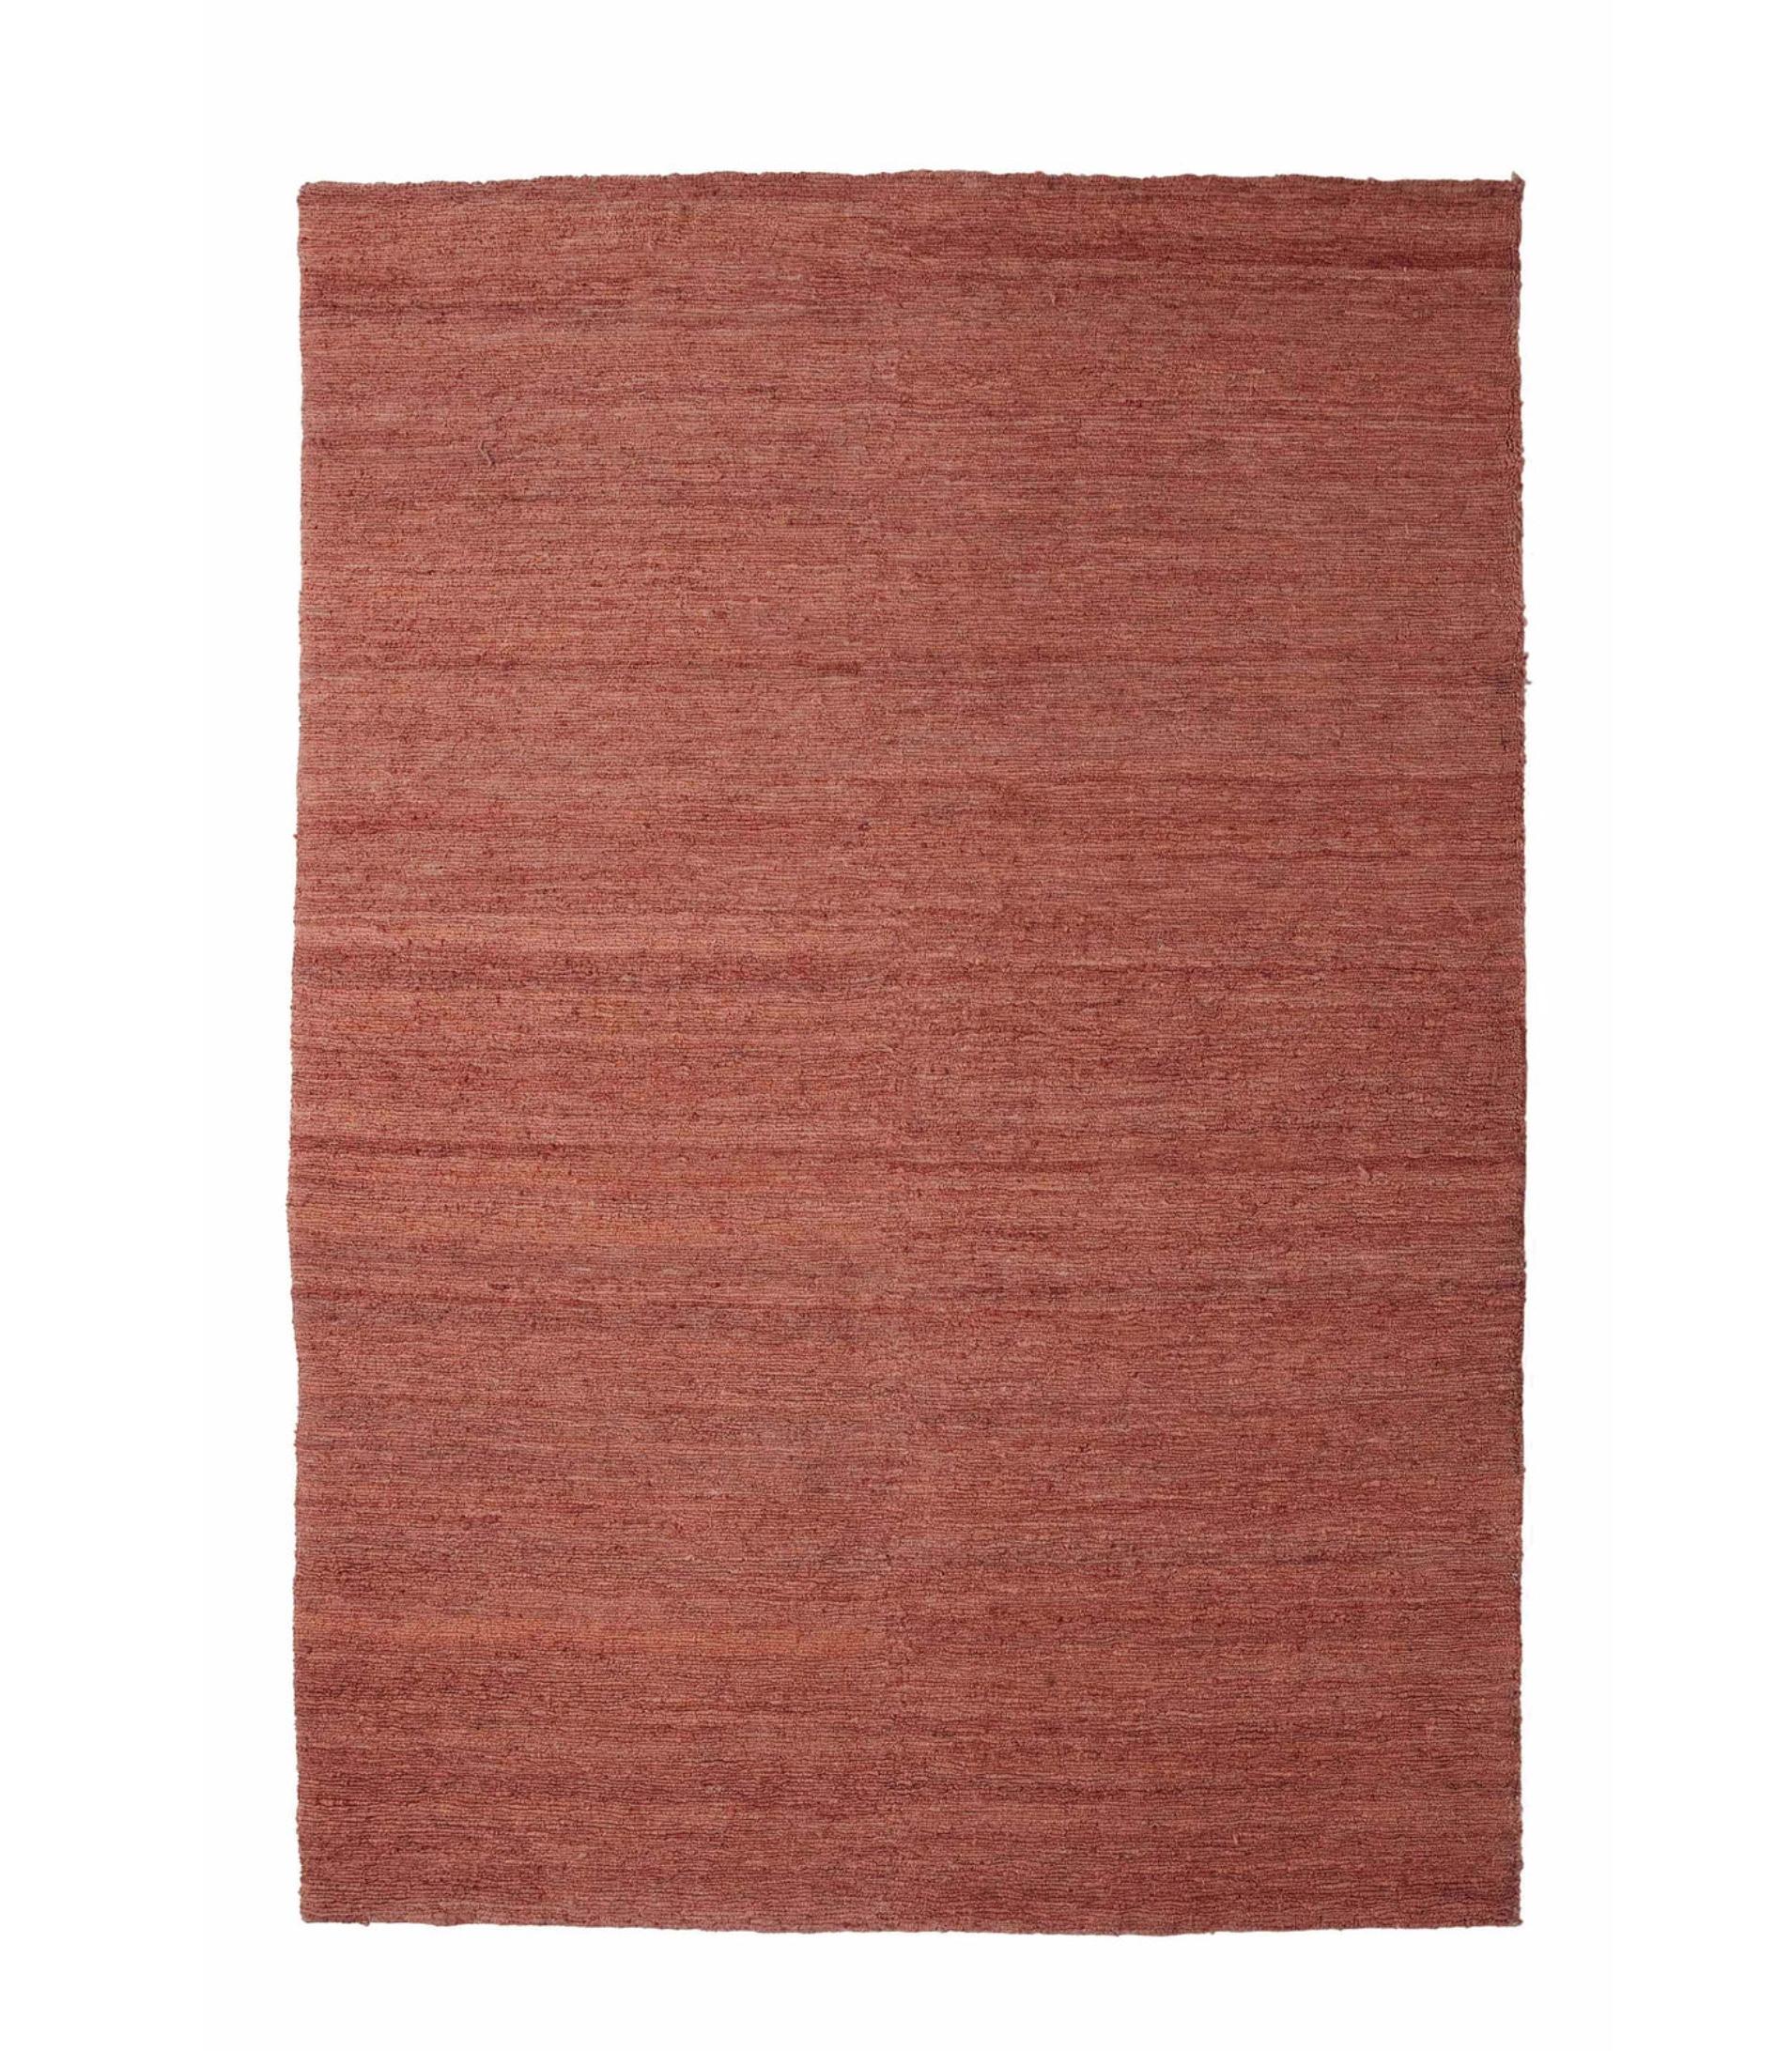 Nanimarquina 'Earth' Rug in Hand Spun Jute. New, current production.

This handmade jute rug evokes the textures of Earth. Hand-knotted with tight loops, Earth is a very cool, rustic rug. The terracotta or 